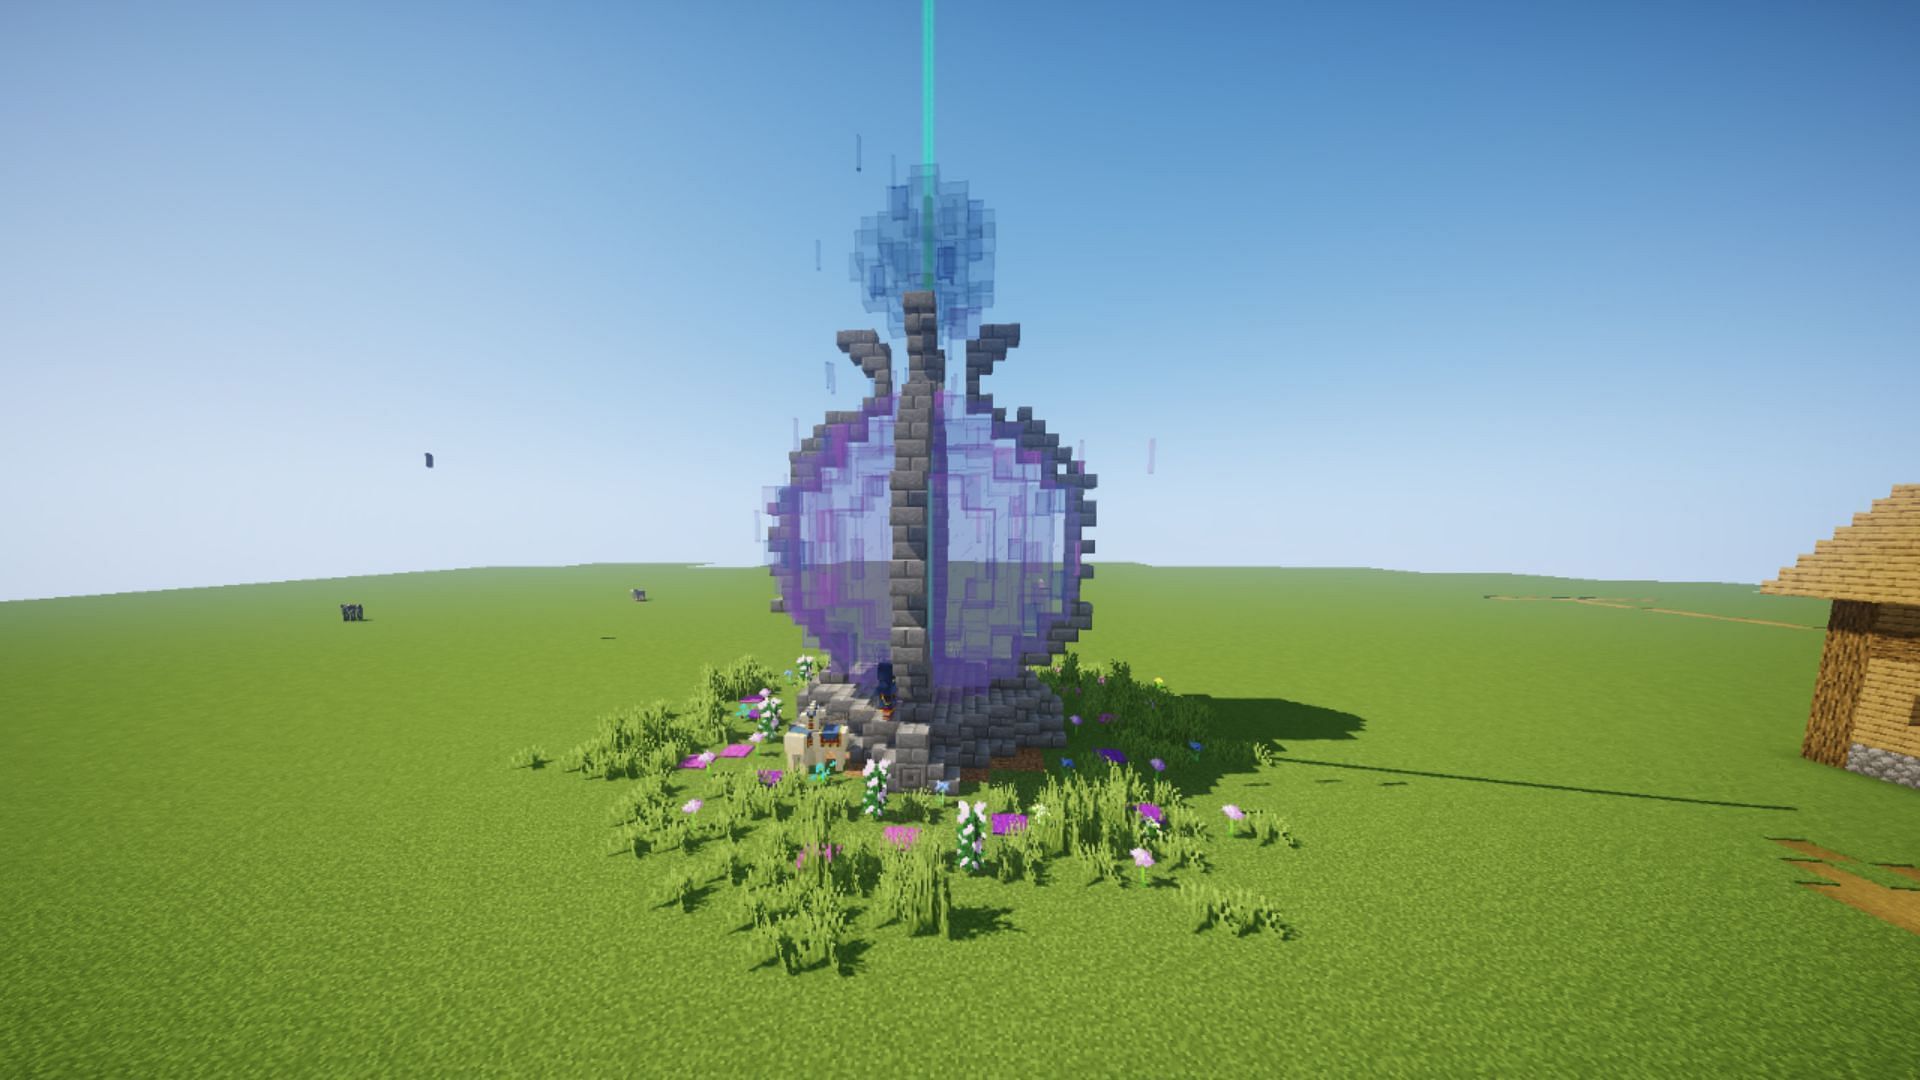 Players can decorate around the beacon for a unique design in Minecraft (Image via Reddit/u/littlePiet)